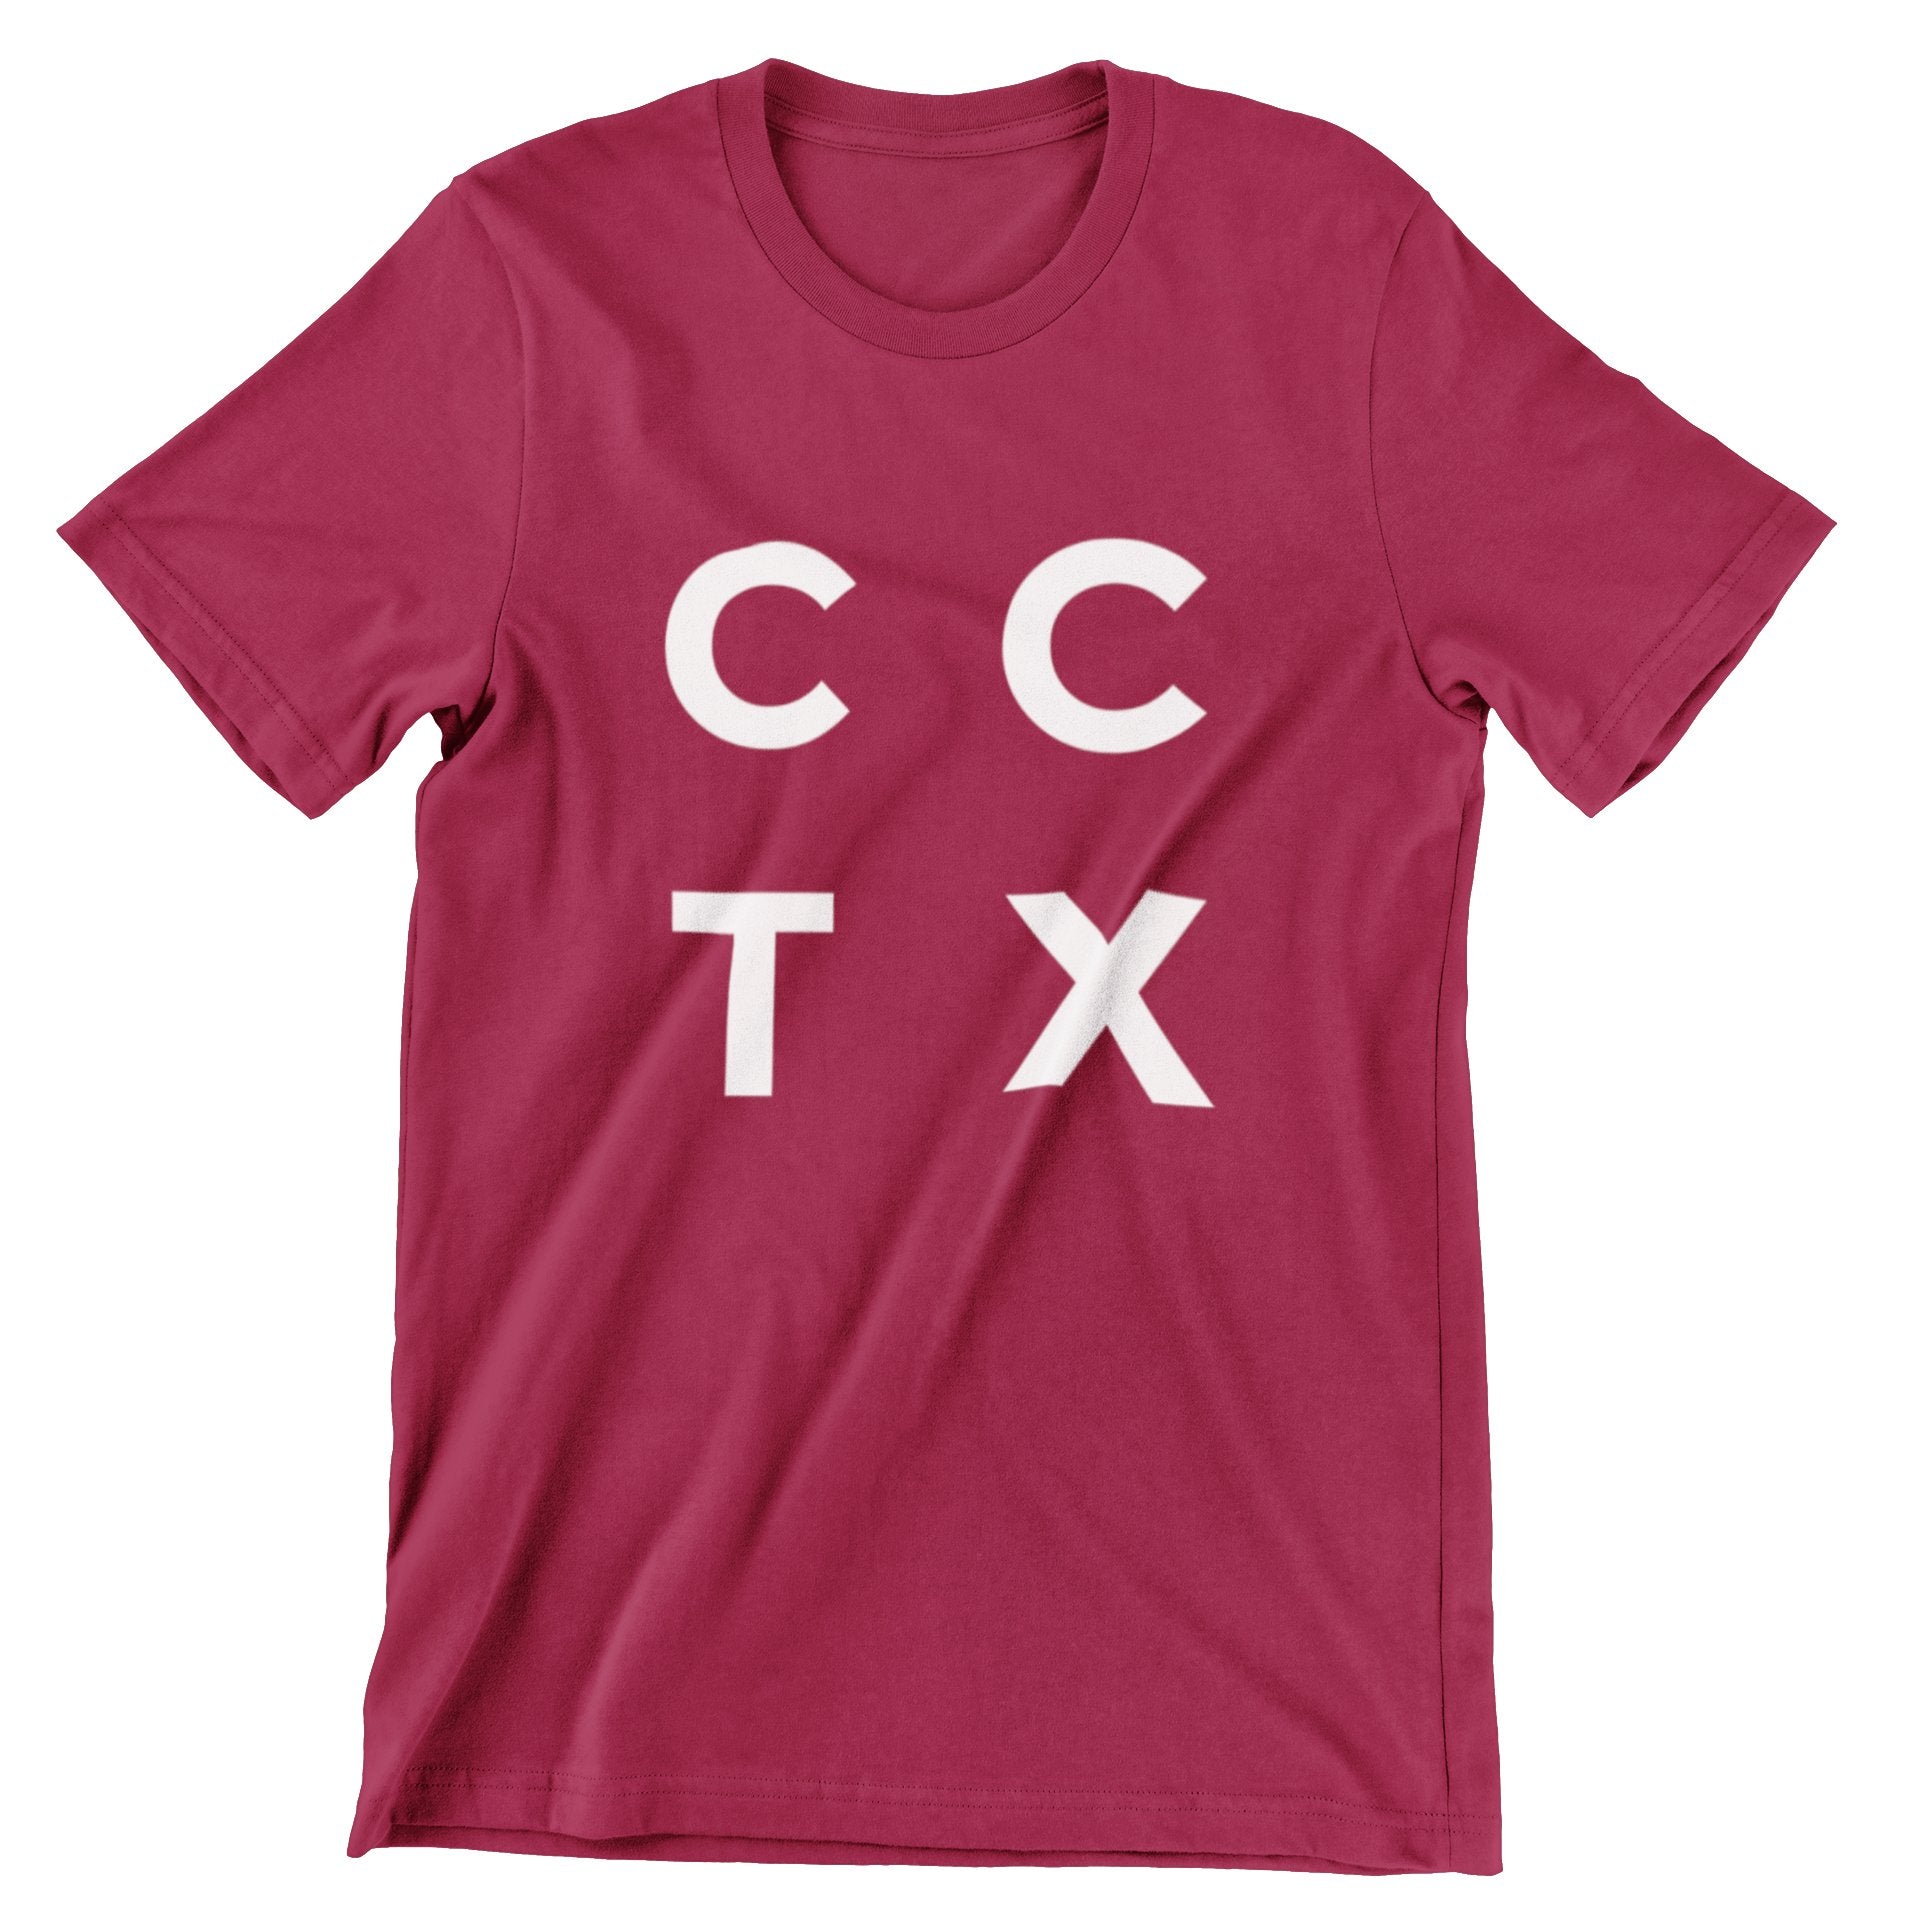 CCTX Stacked T-Shirt